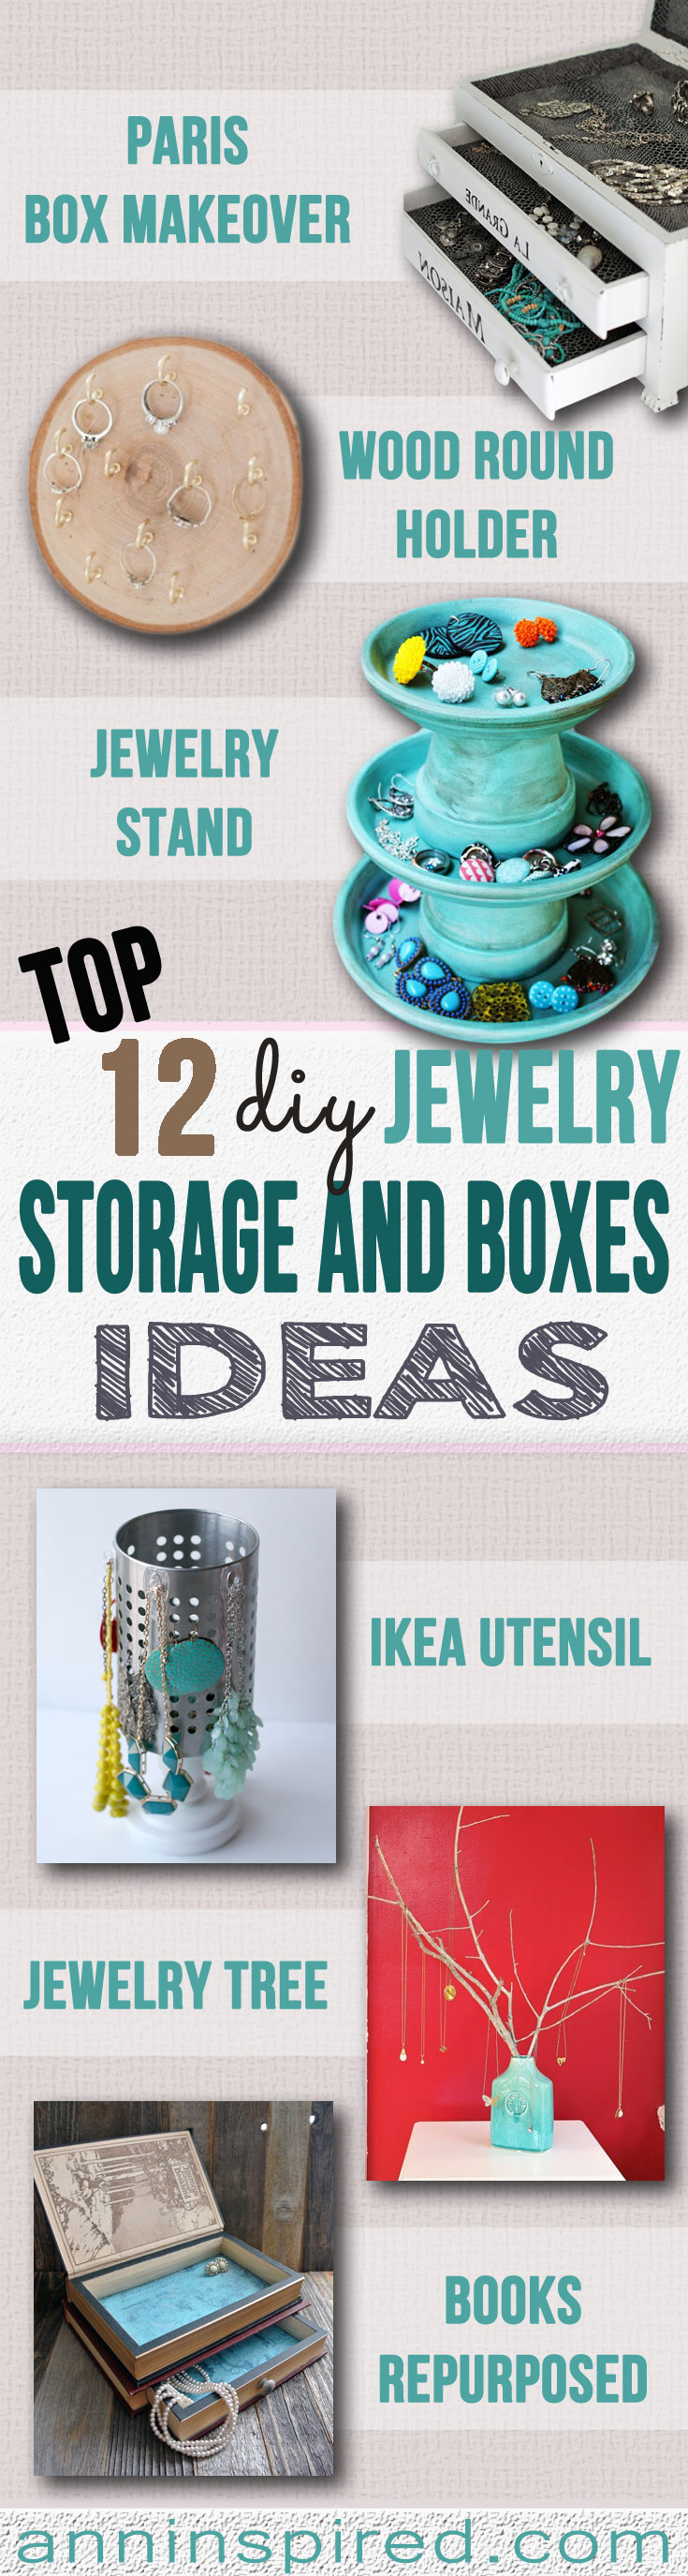 Top 12 DIY Jewelry Storage and Boxes Ideas